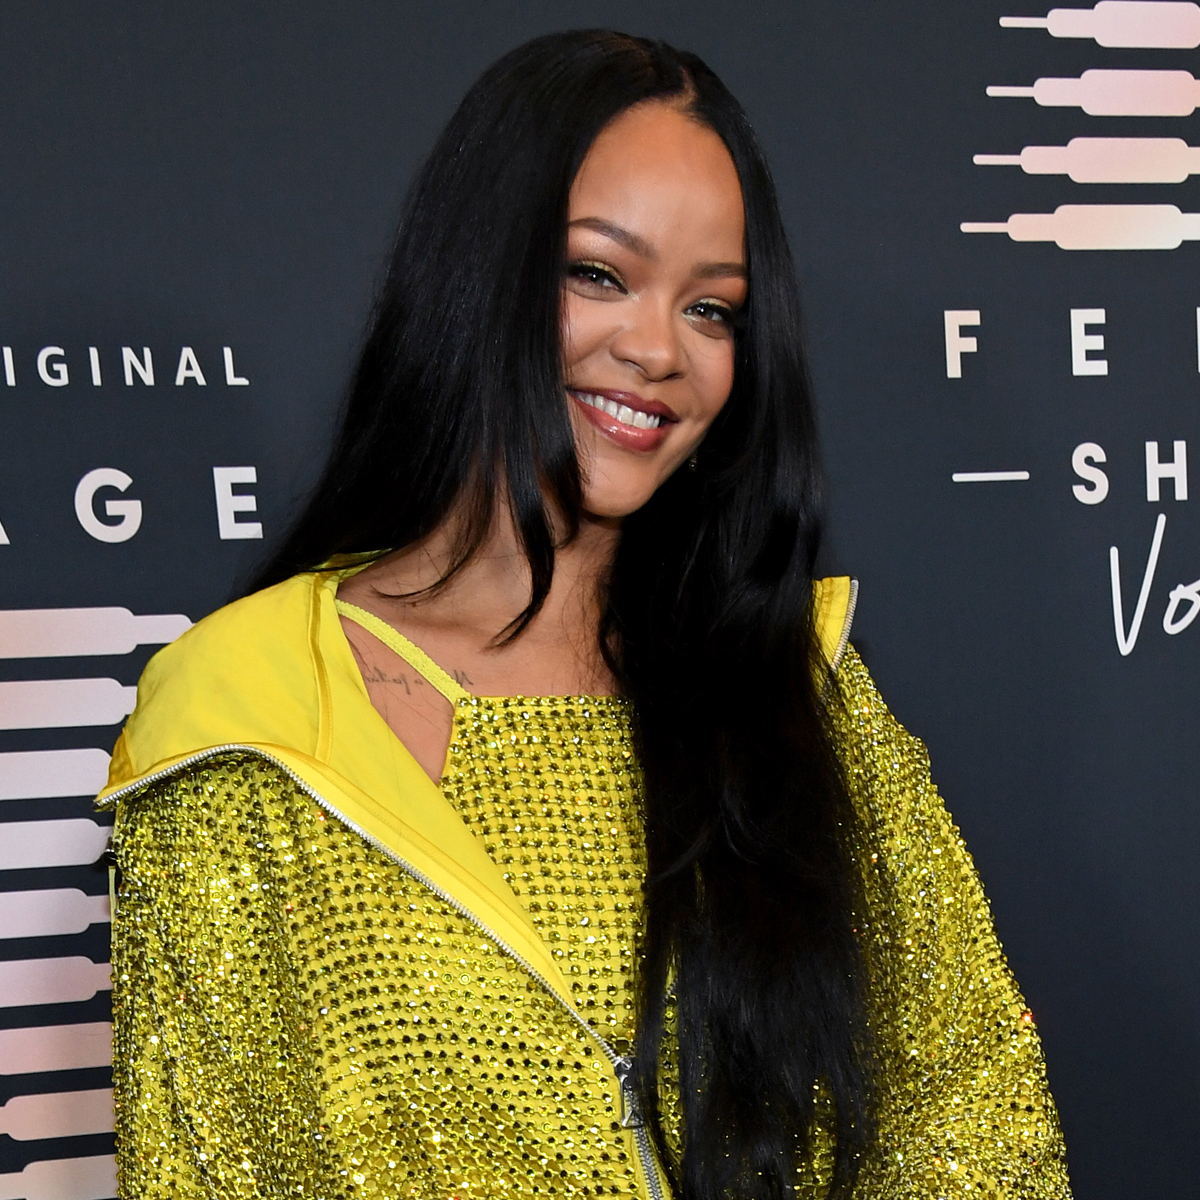 Rihanna is now a billionaire and the world's wealthiest female